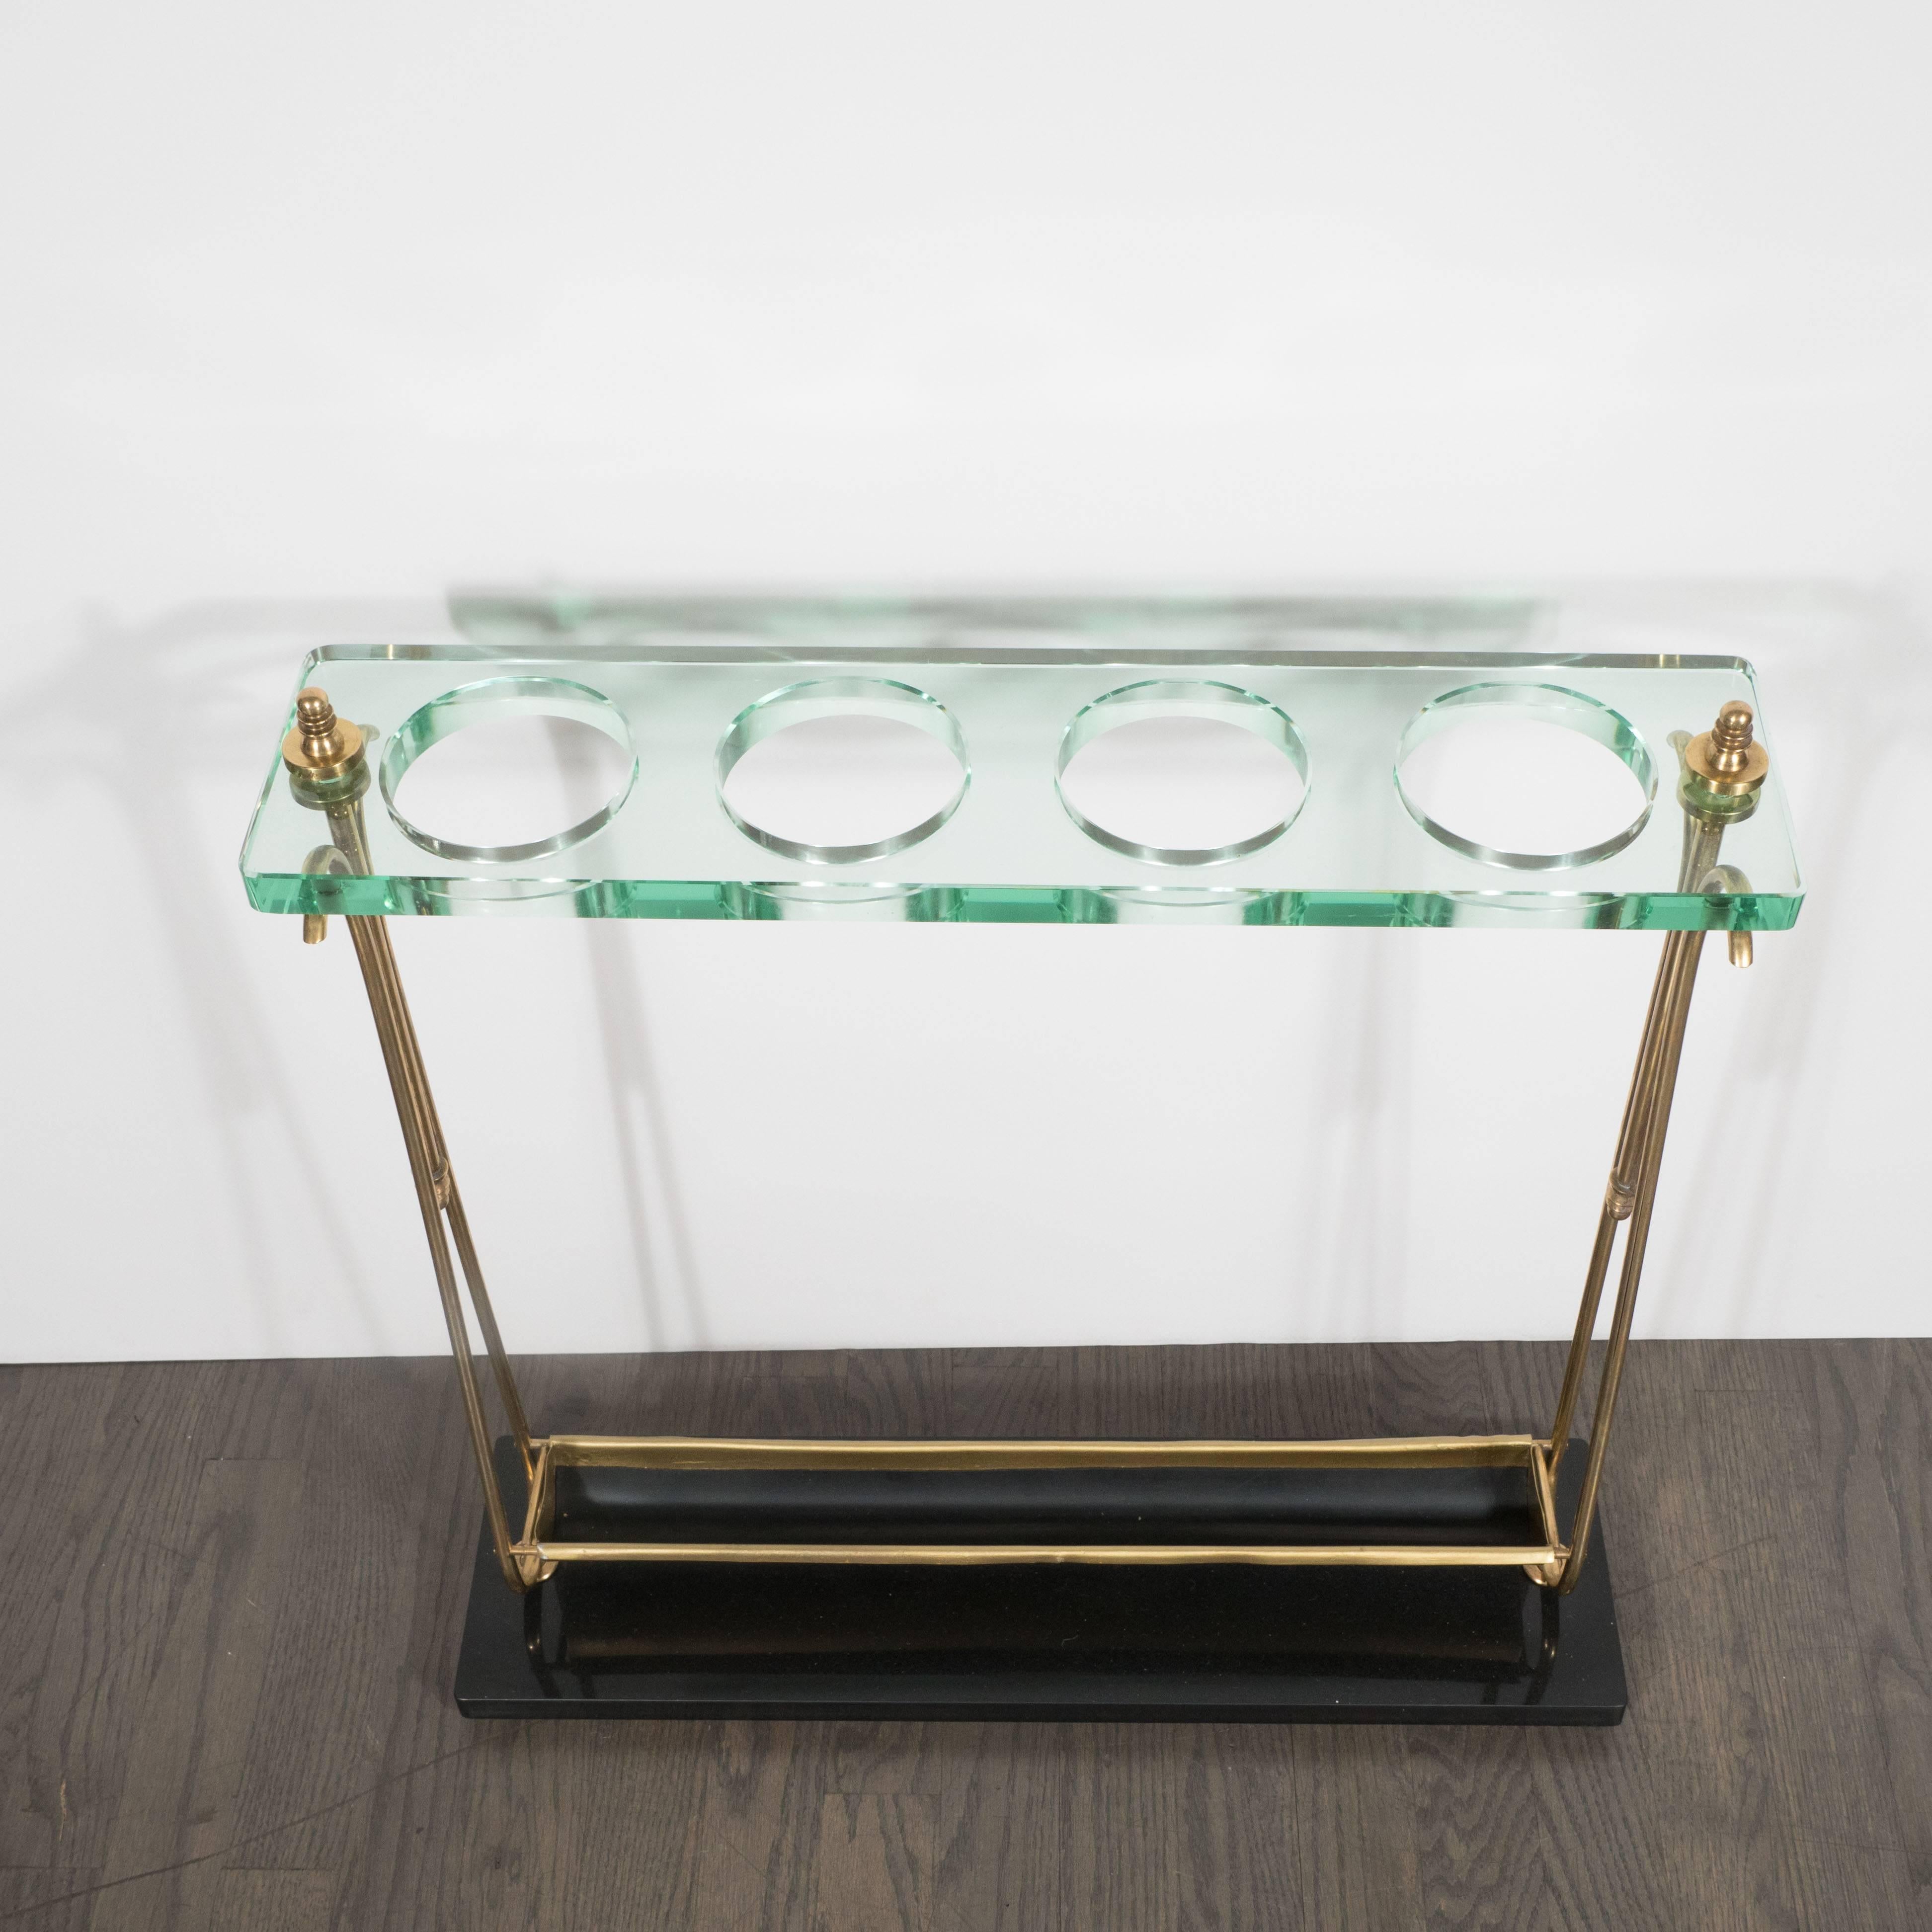 Italian Mid-Century Modern Brass and Marble Umbrella Stand in the Manner of Fontana Arte